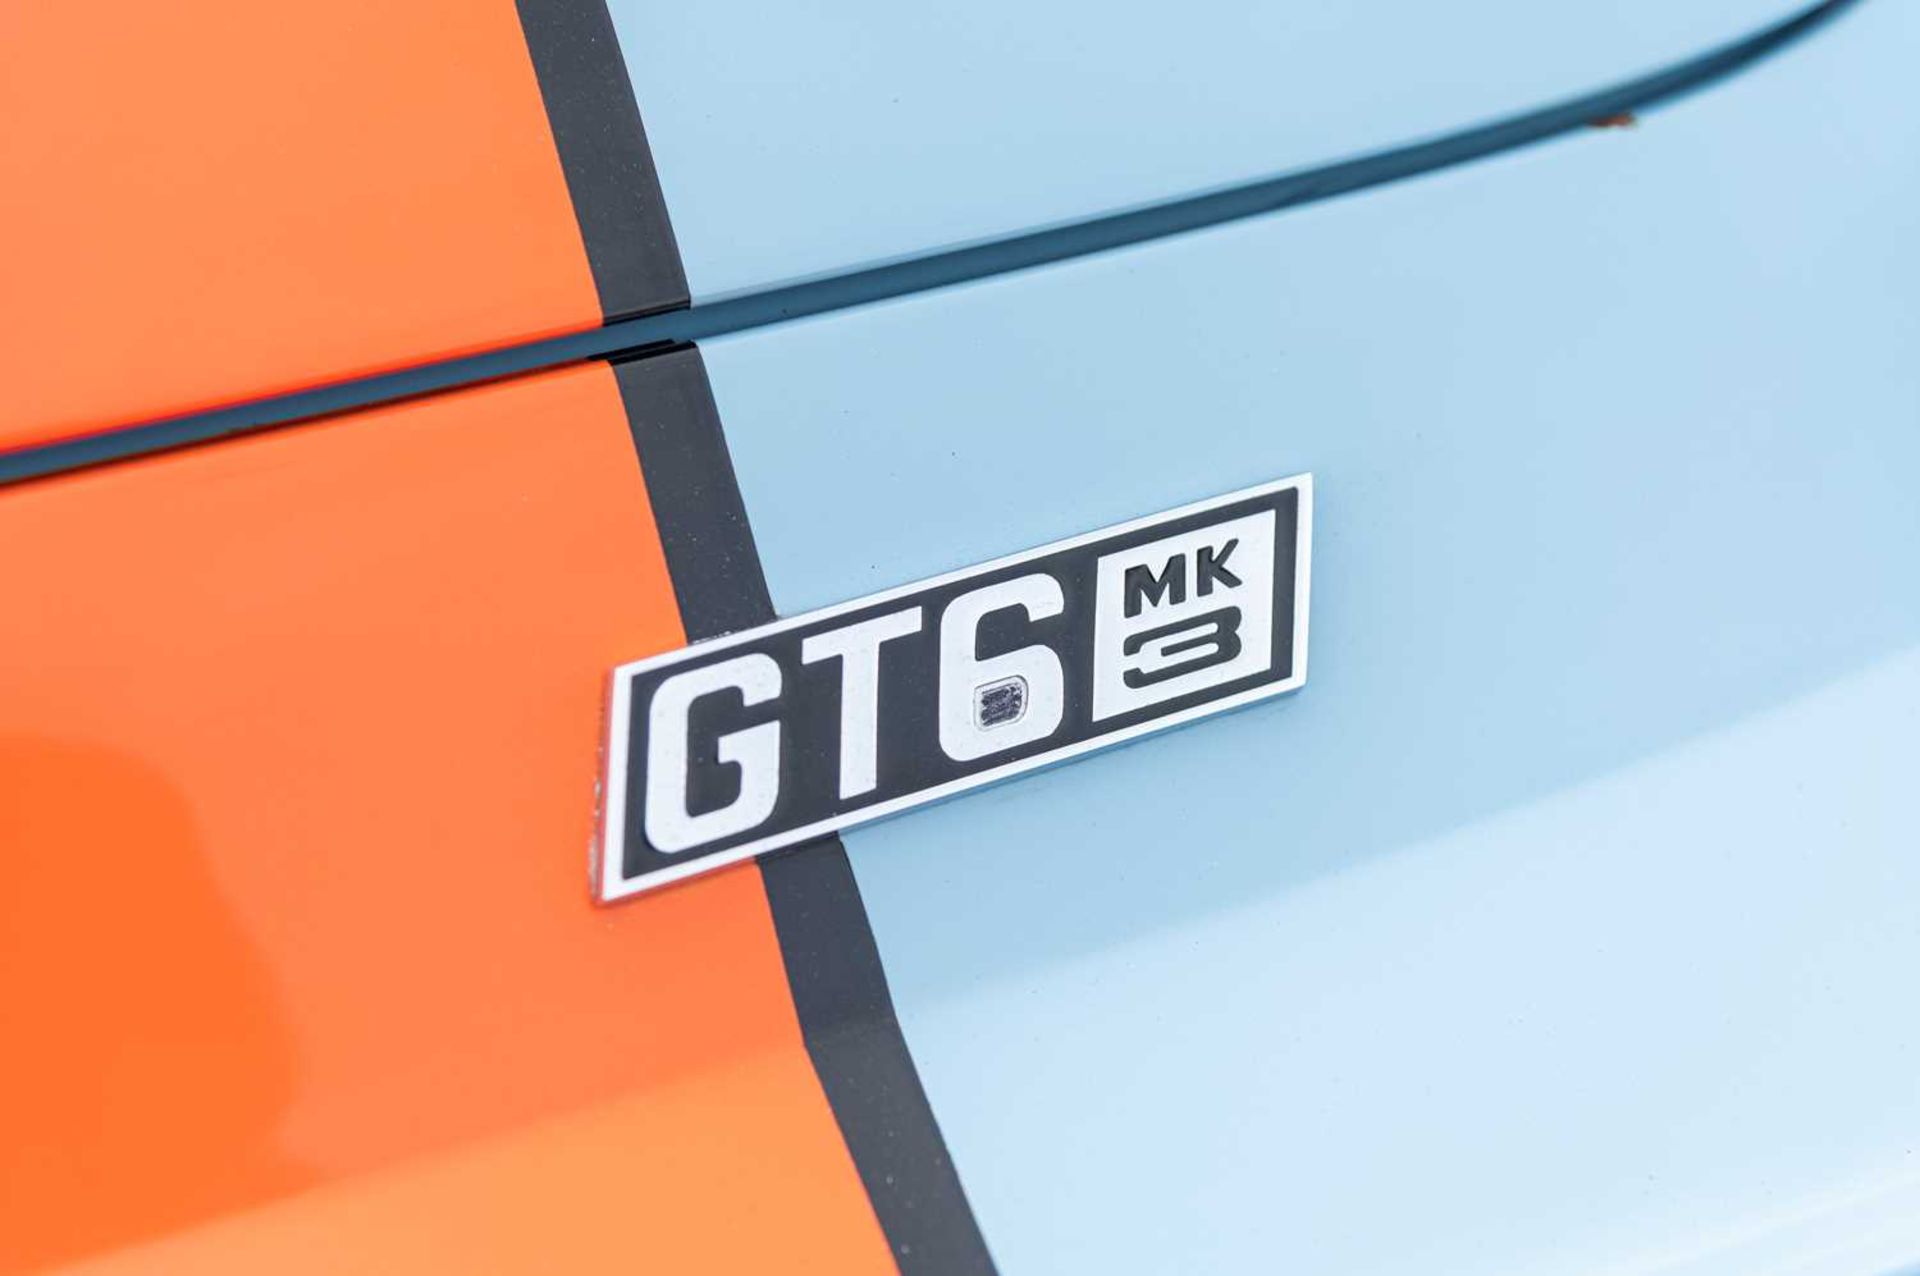 1973 Triumph GT6  ***NO RESERVE*** Presented in Gulf Racing-inspired paintwork, road-going track wea - Bild 21 aus 65